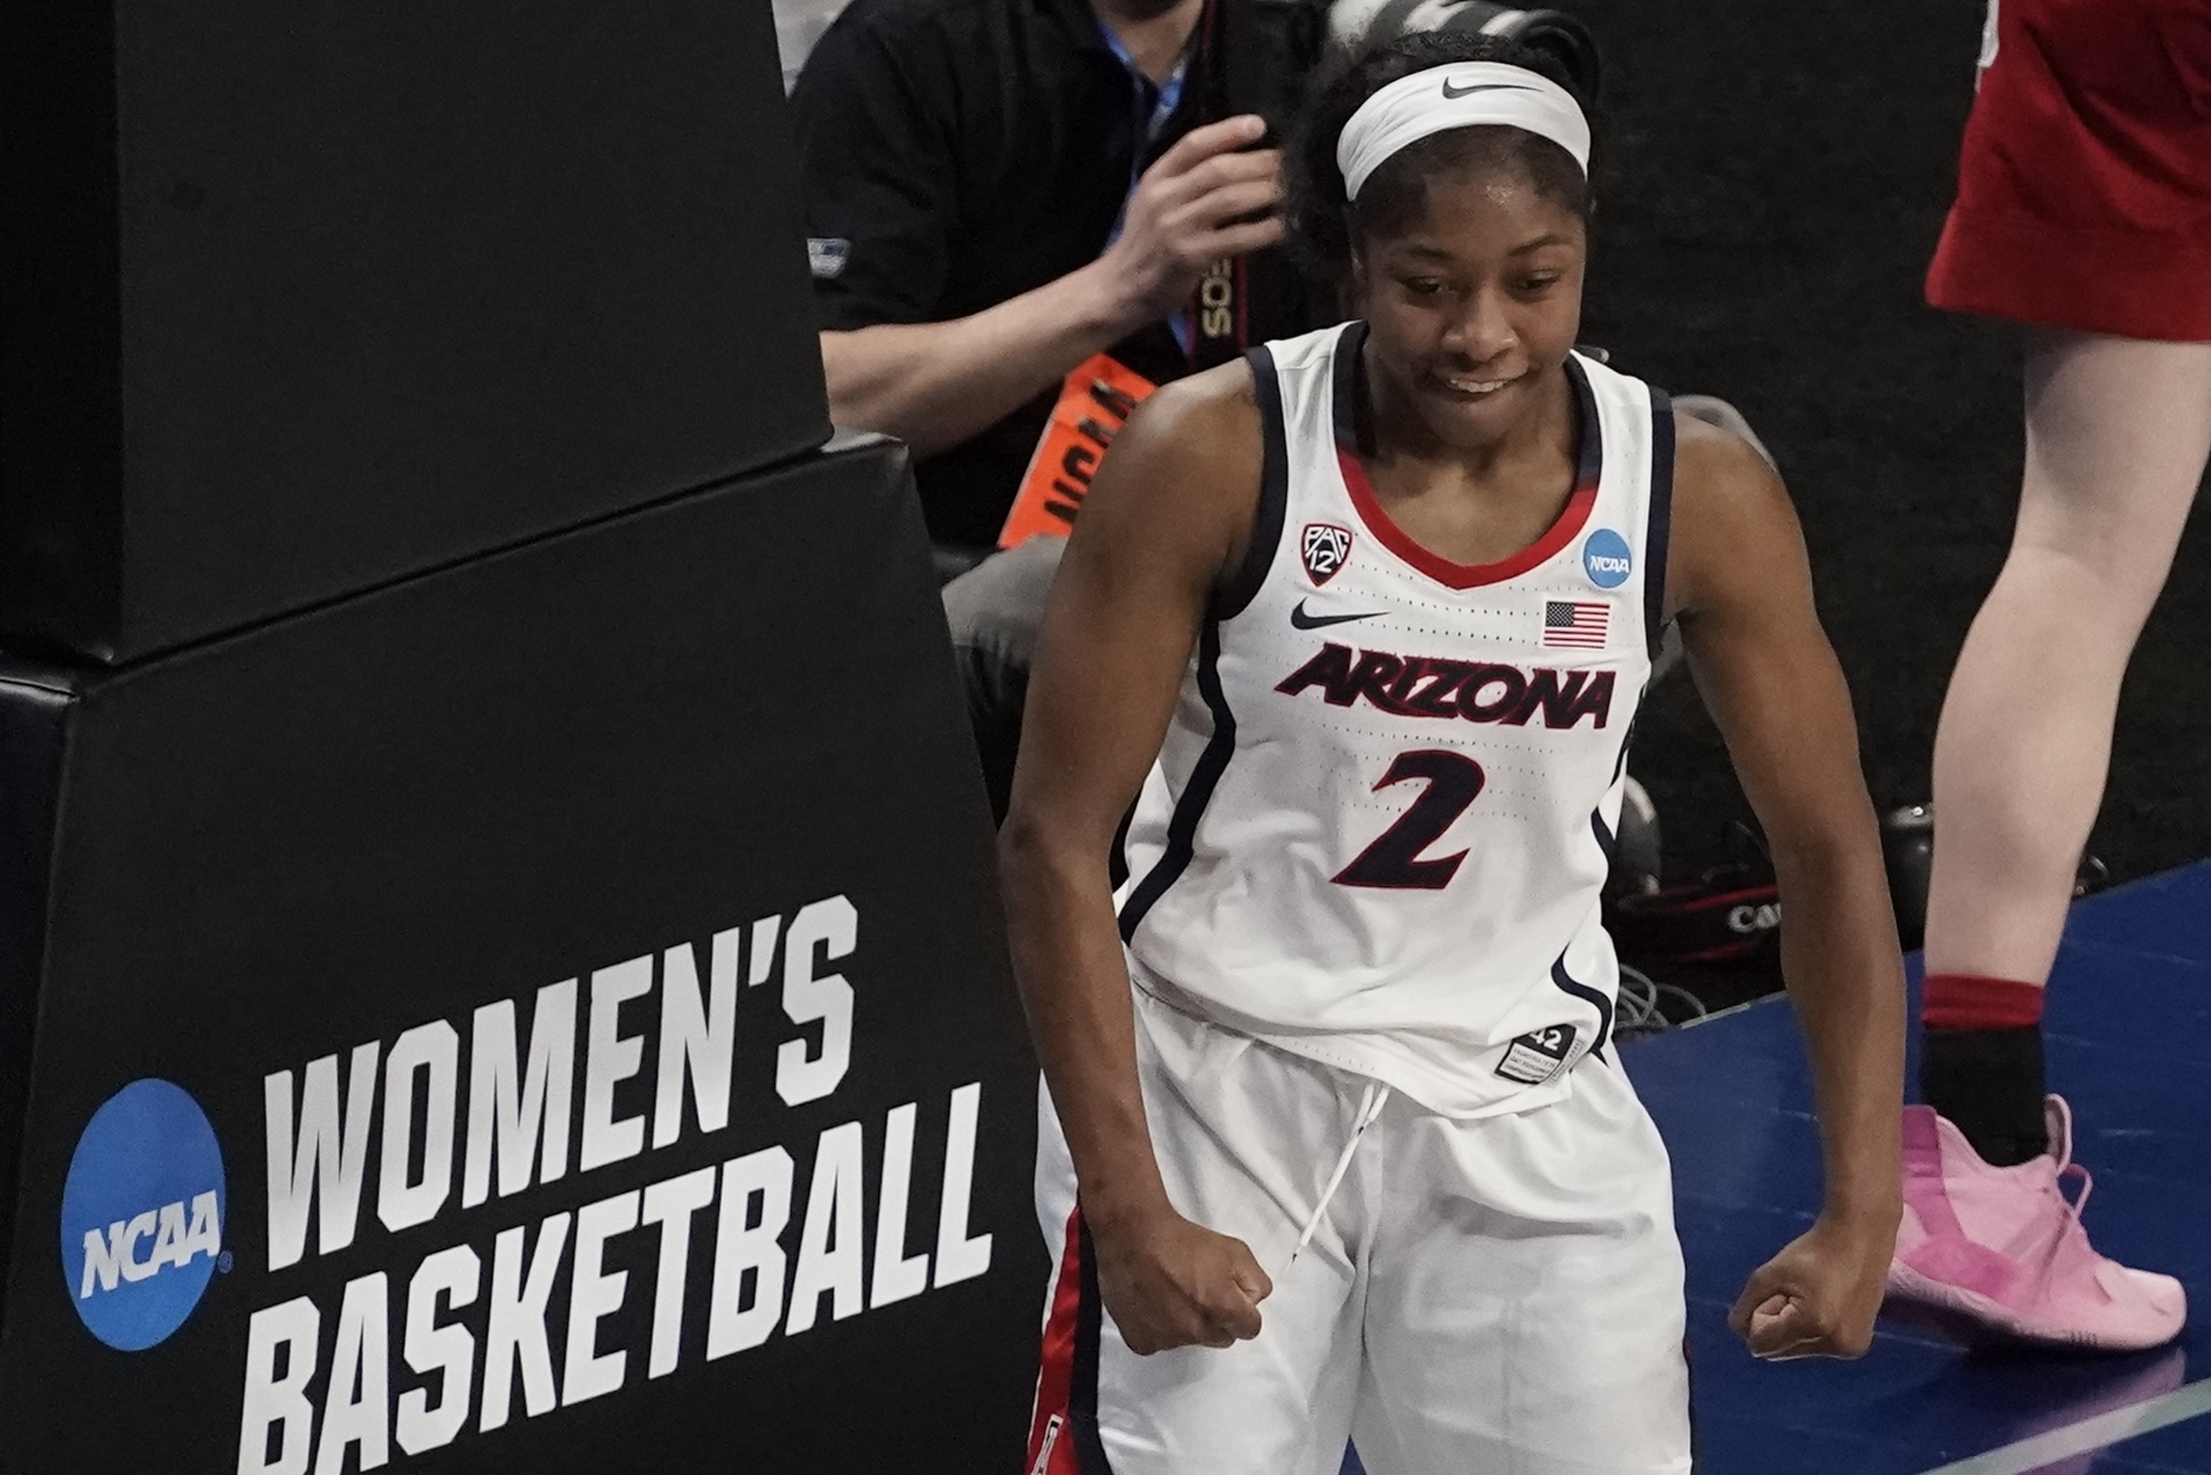 NCAA Womens Basketball Tournament Final Four free live stream (4/2/21) How to watch, time, channel